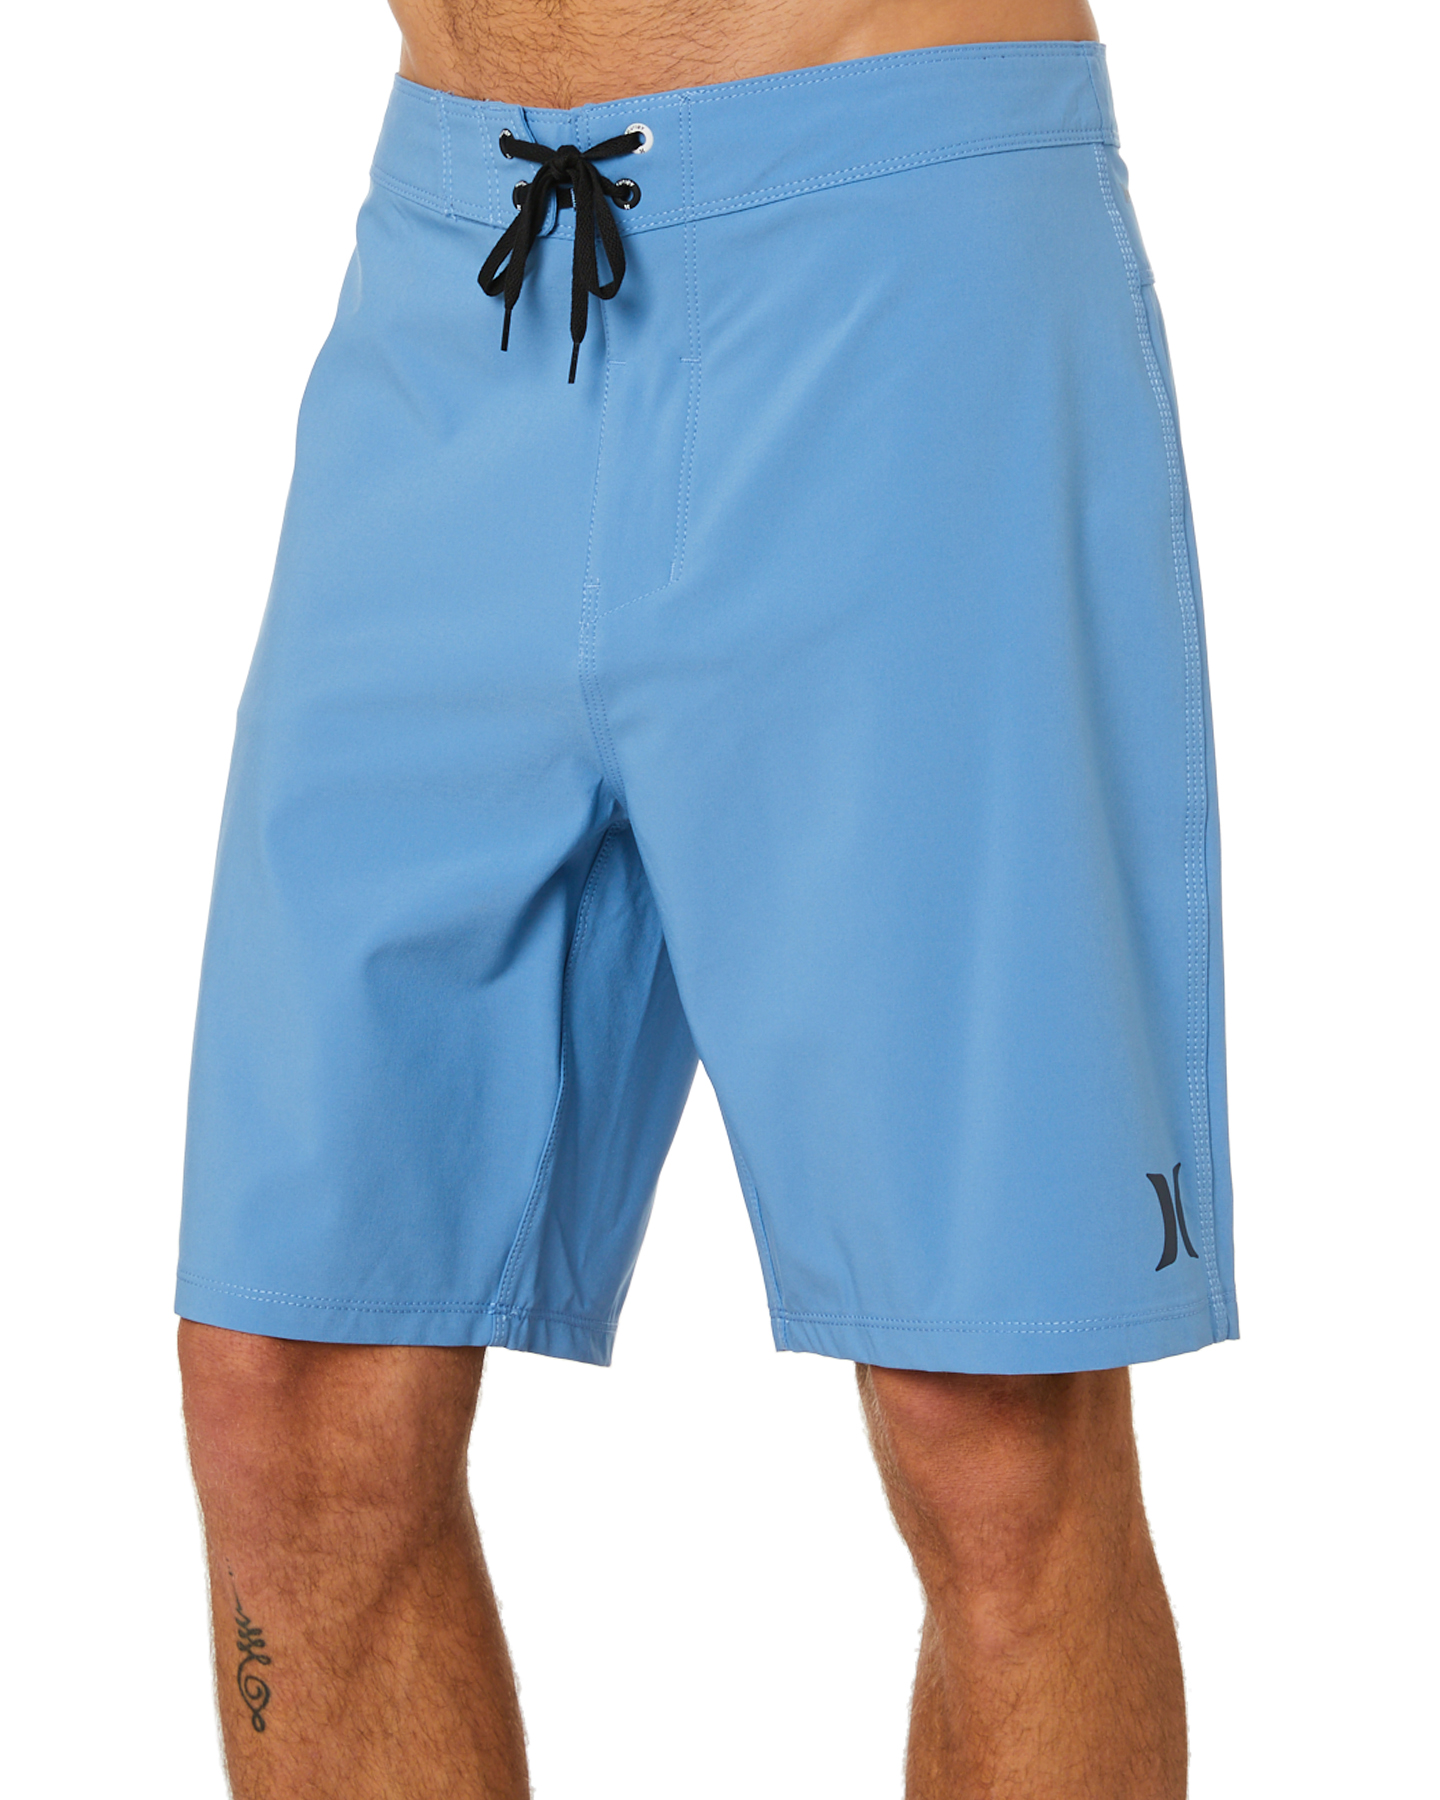 Hurley Phtm Oao Mens 20In Boardshort - Blue Beyond | SurfStitch